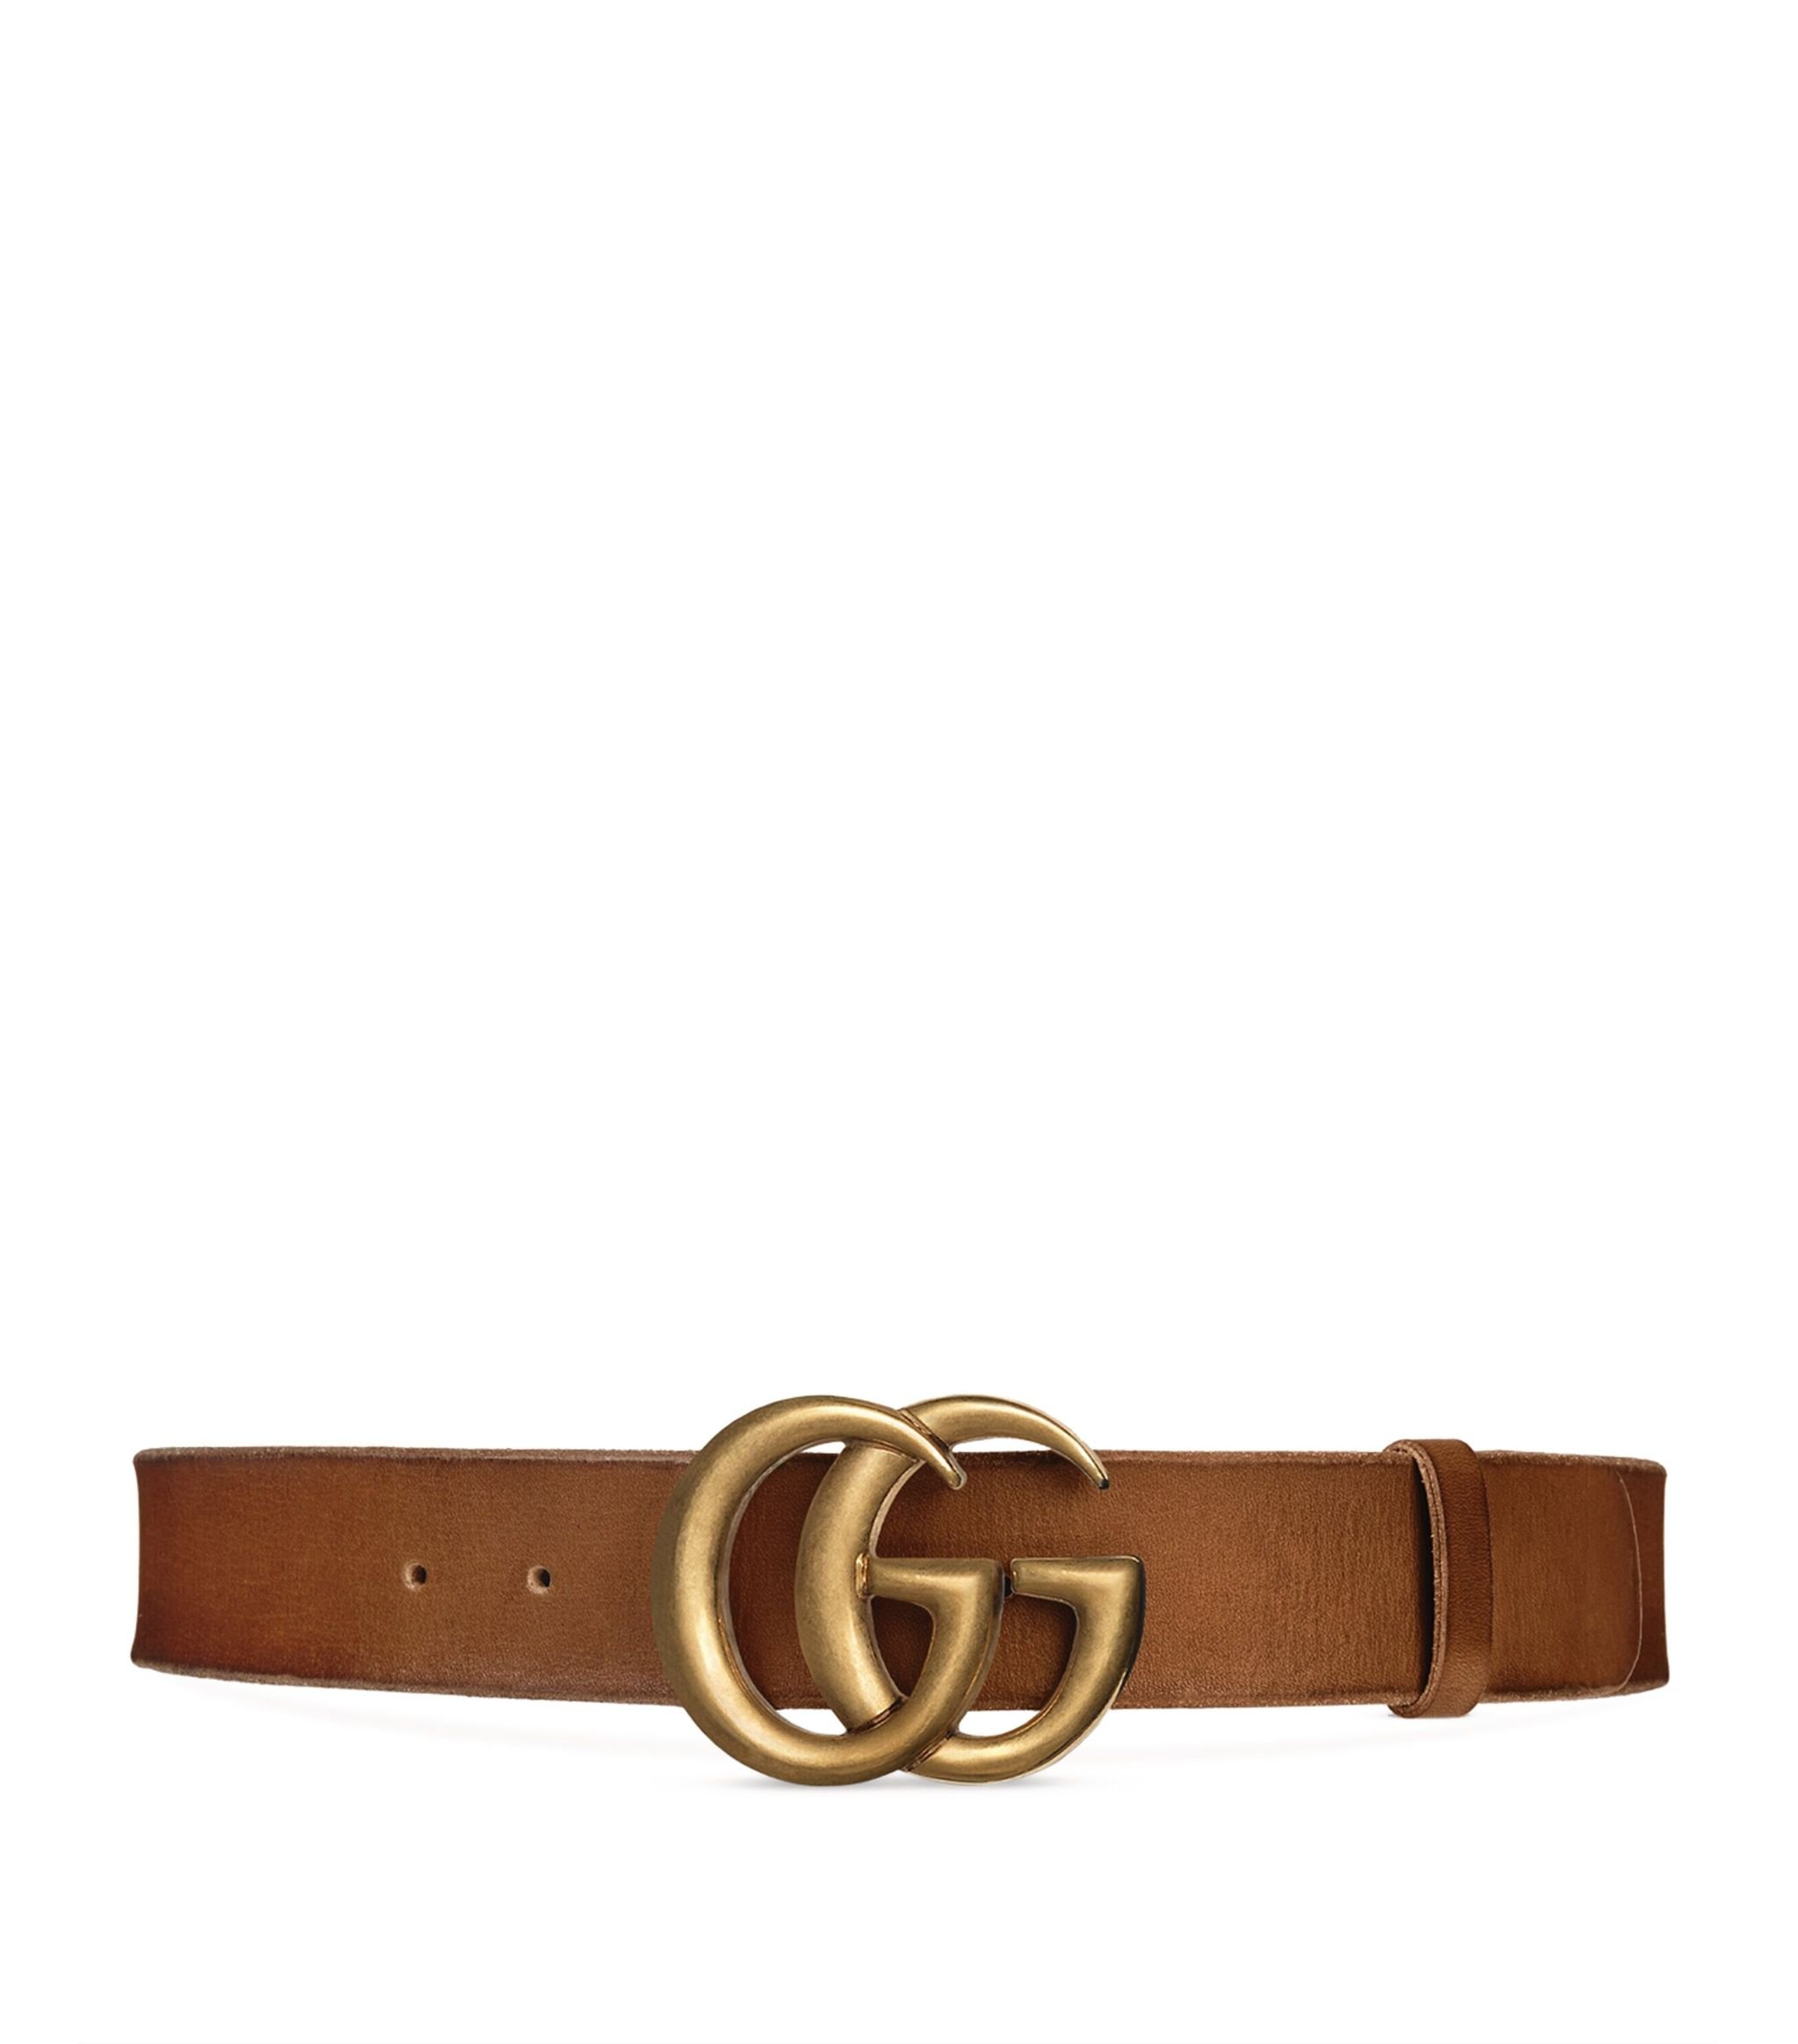 Gucci GG Marmont Wide Belt in Brown Leather.jpg